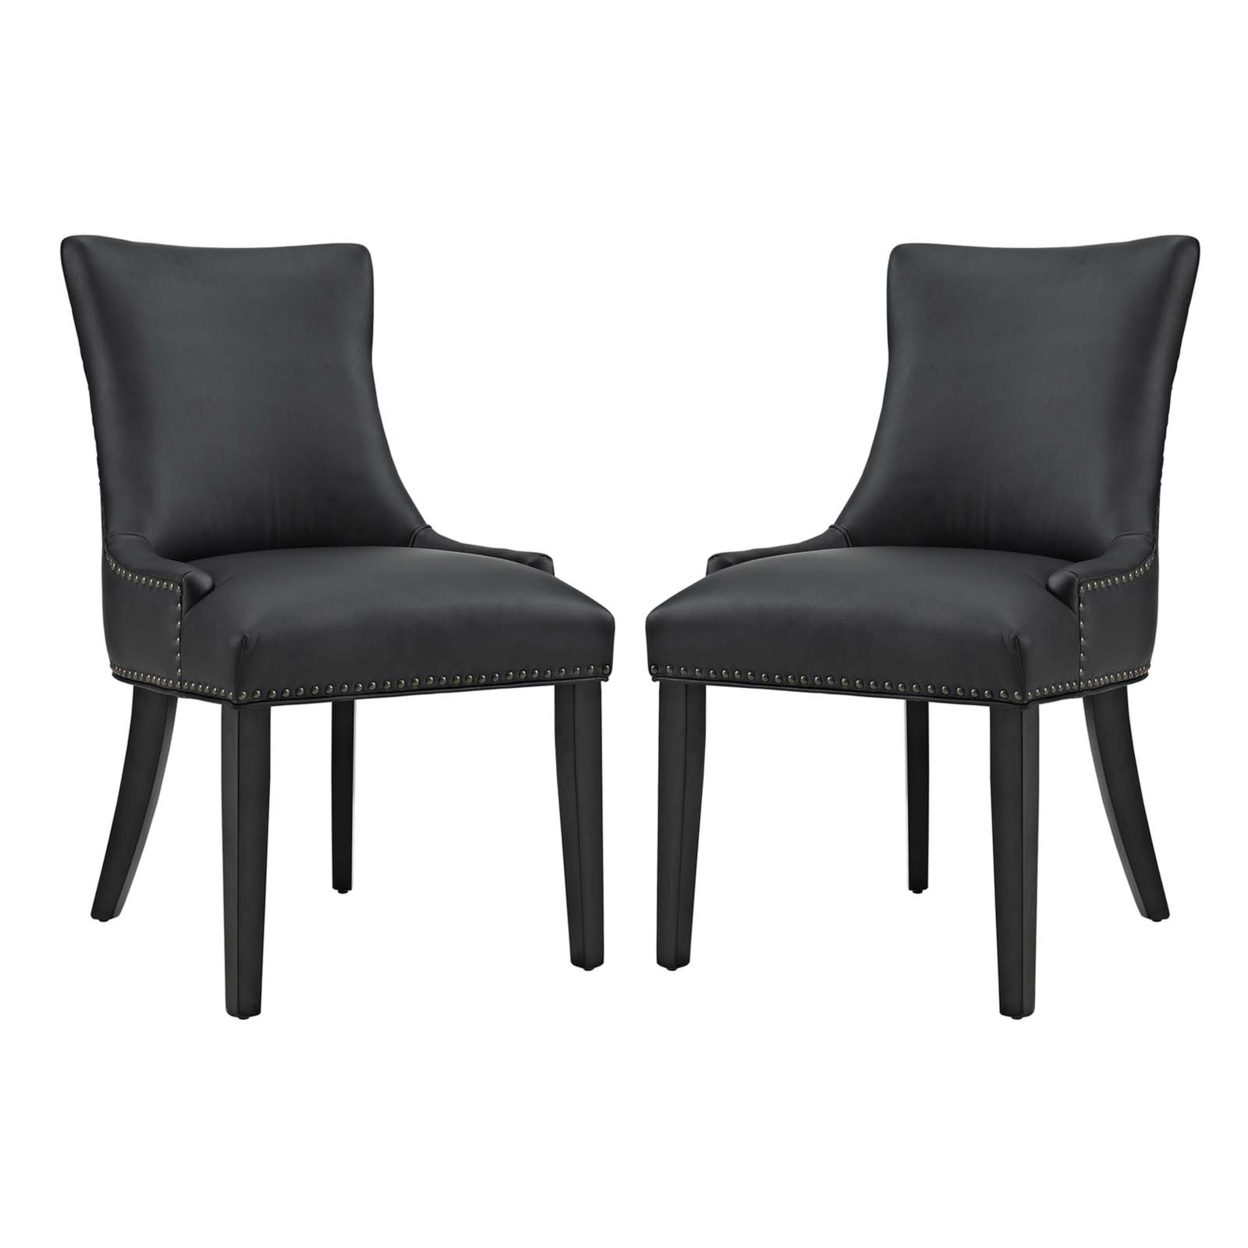 Marquis Dining Chair Faux Leather Set Of 2,Black